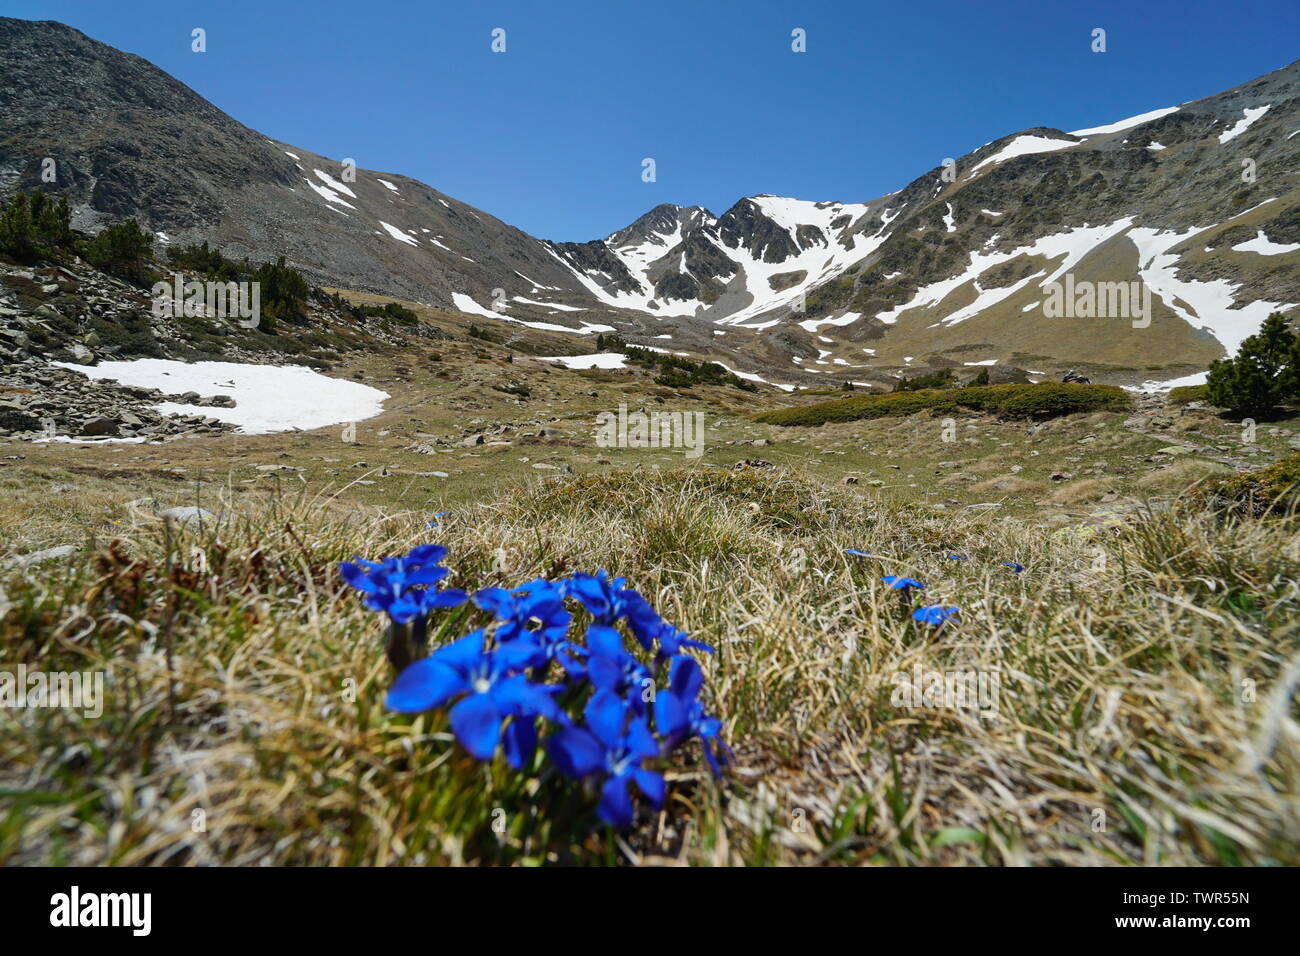 Mountain landscape massif of Carlit with blue flowers in foreground, France, Pyrenees-Orientales, natural park of the Catalan Pyrenees Stock Photo